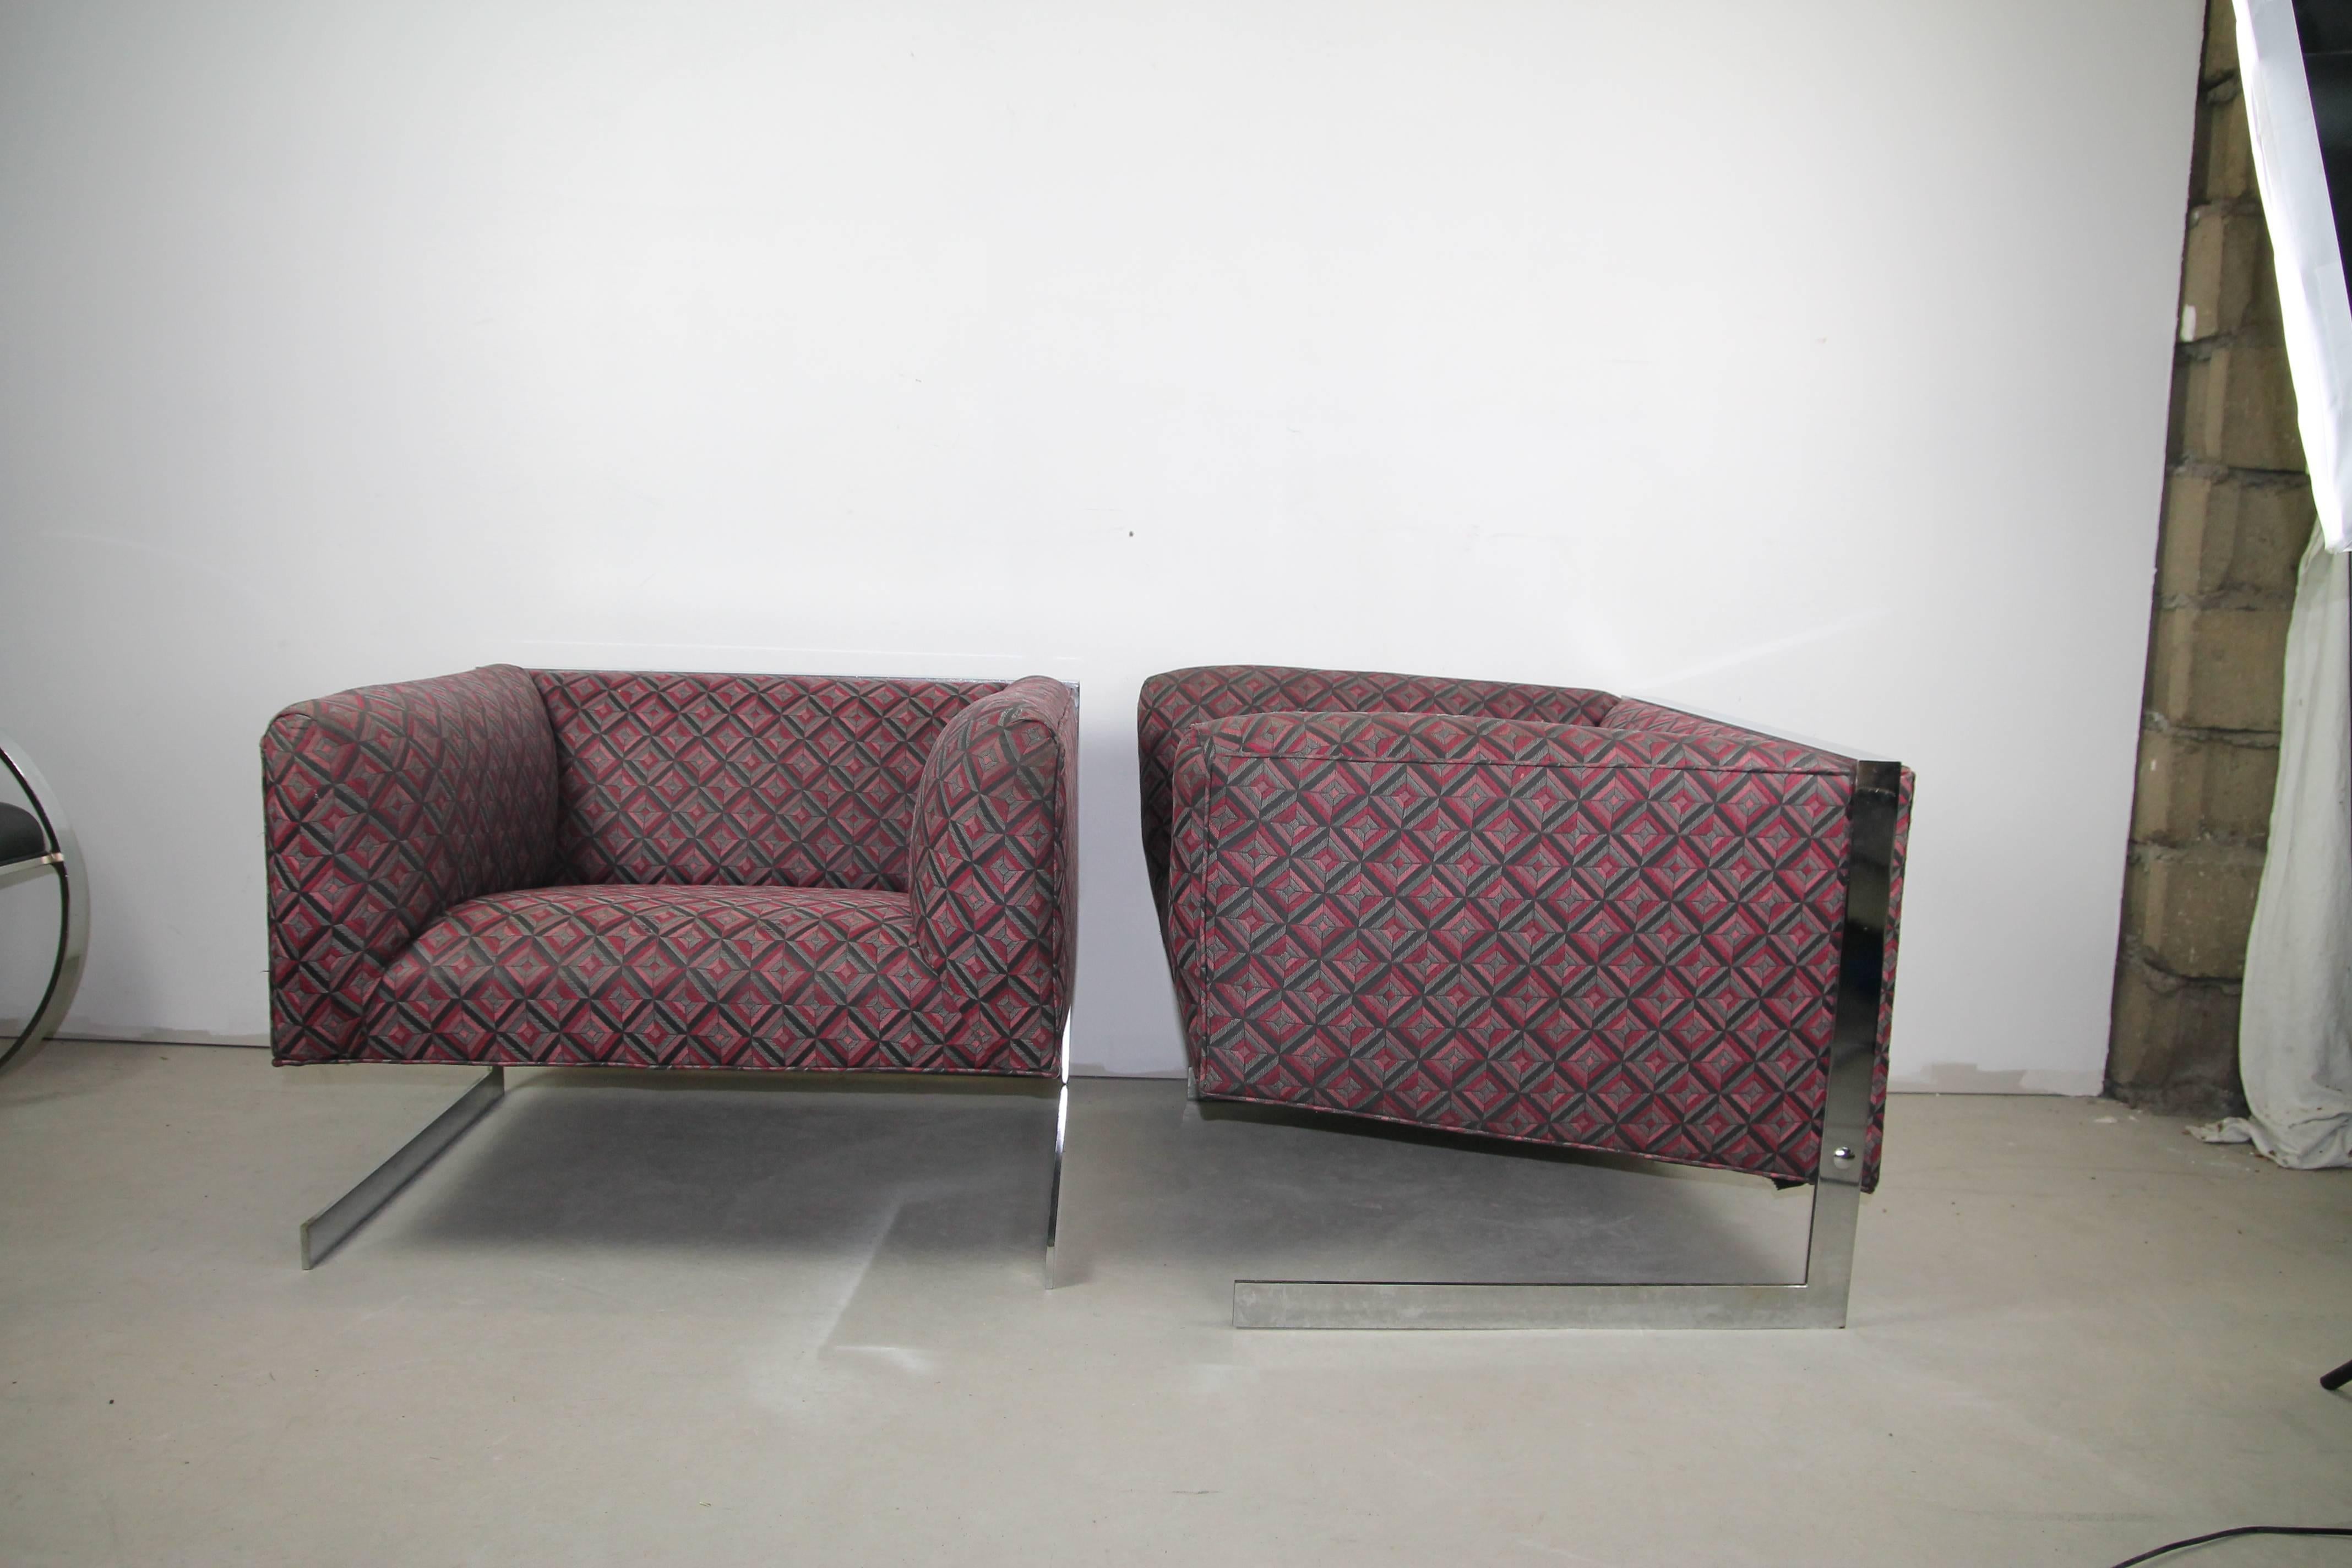 Pair of Cantilever lounge chairs. Retains the original fabric that can be used as is. Some darkening of the fabric in a few places and a couple slight pulls. Light scratches on the chrome and minor loss on the back legs but not very noticeable.